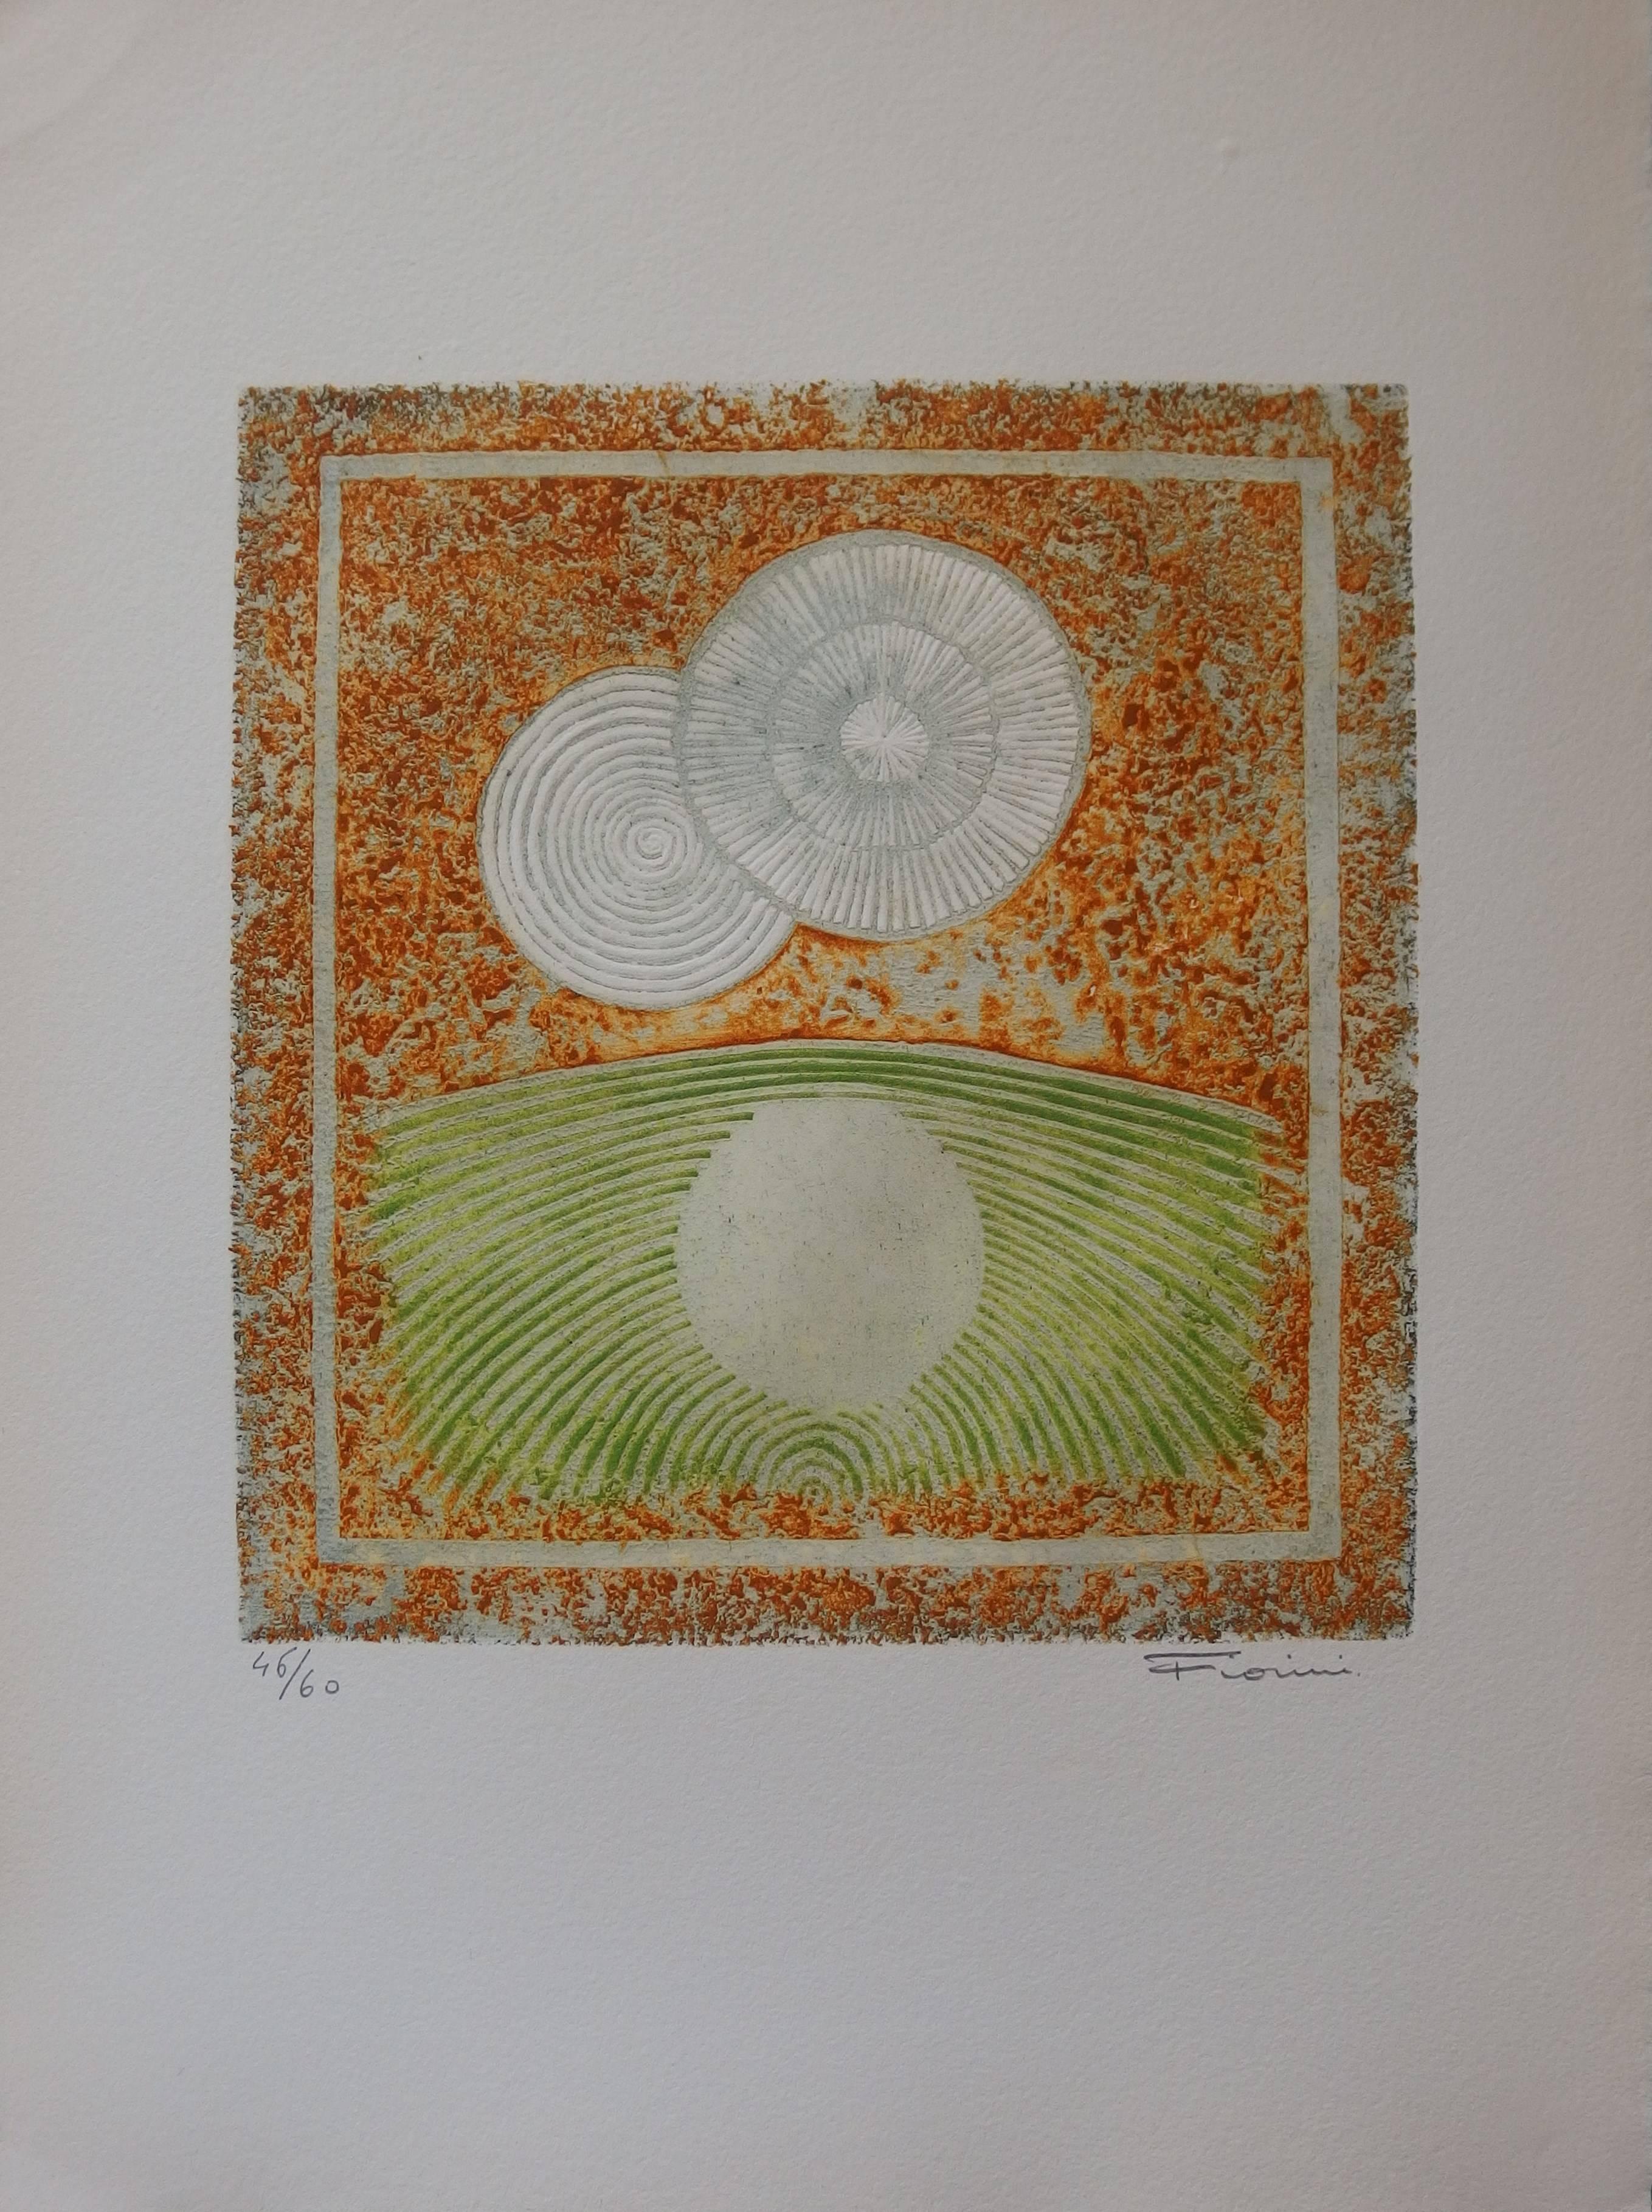 Marcel Fiorini Landscape Print - Two Suns, One Reflection - Original handsigned etching - 60 copies